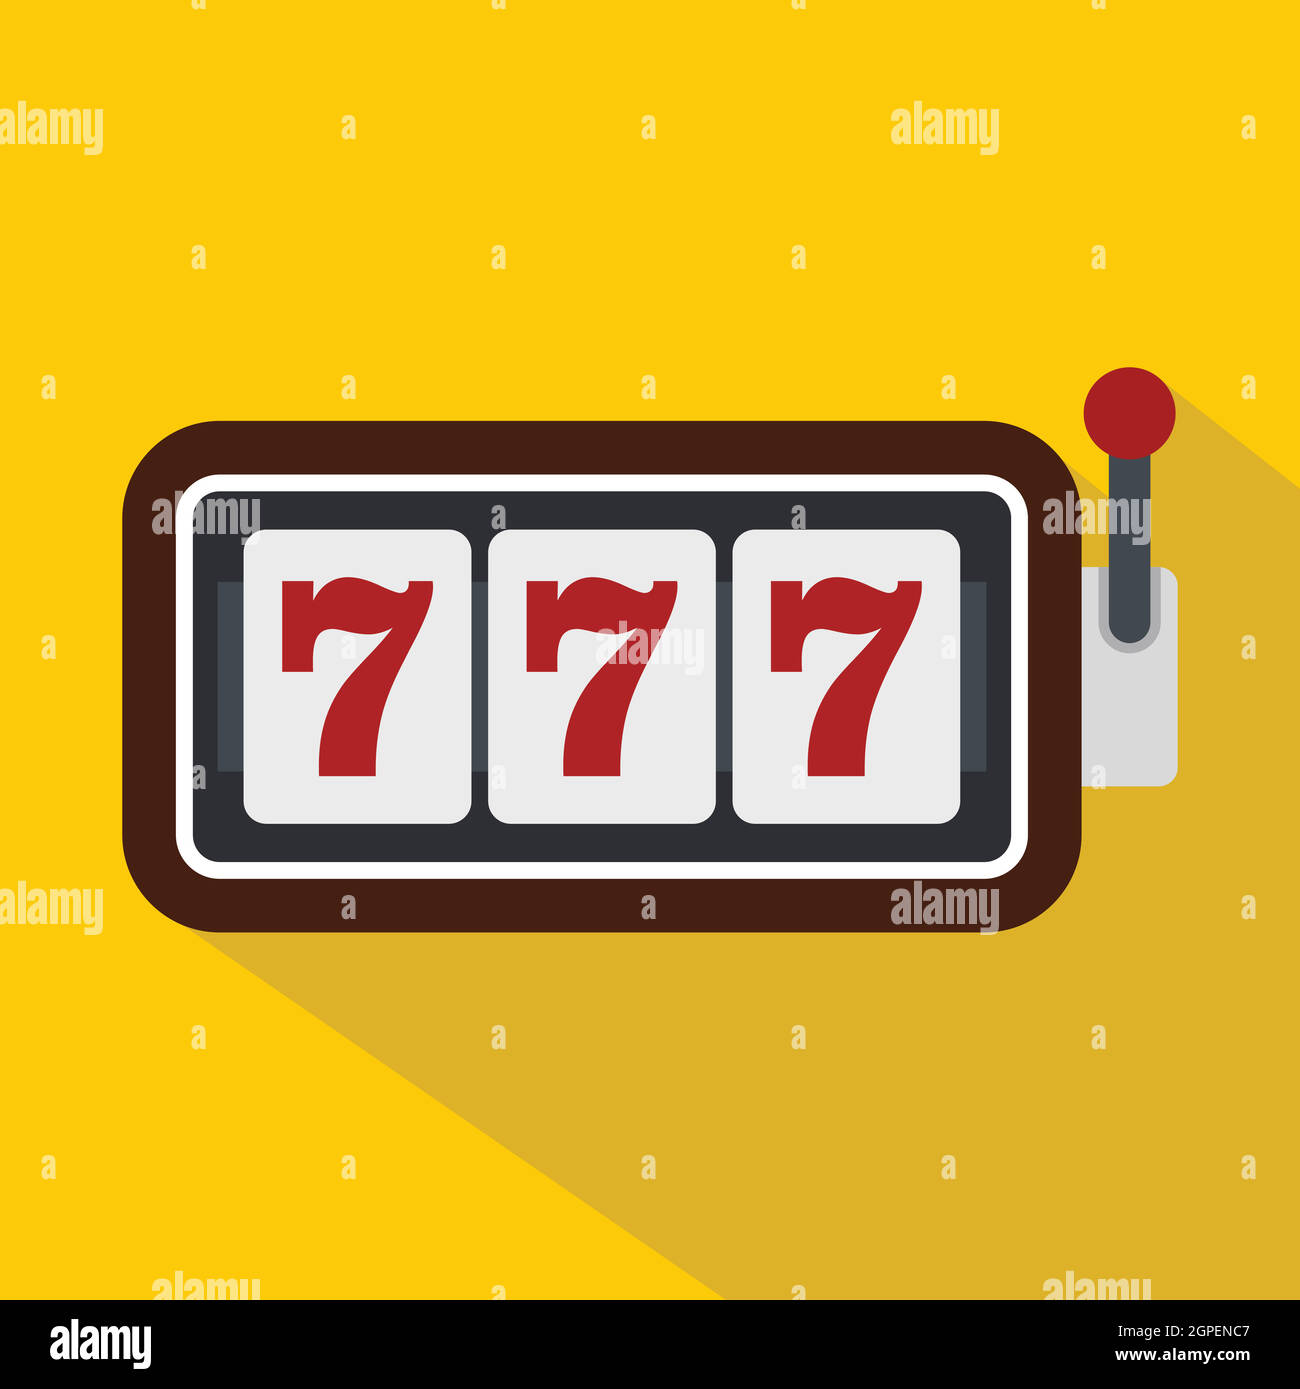 Betting machine Stock Vector Images - Alamy